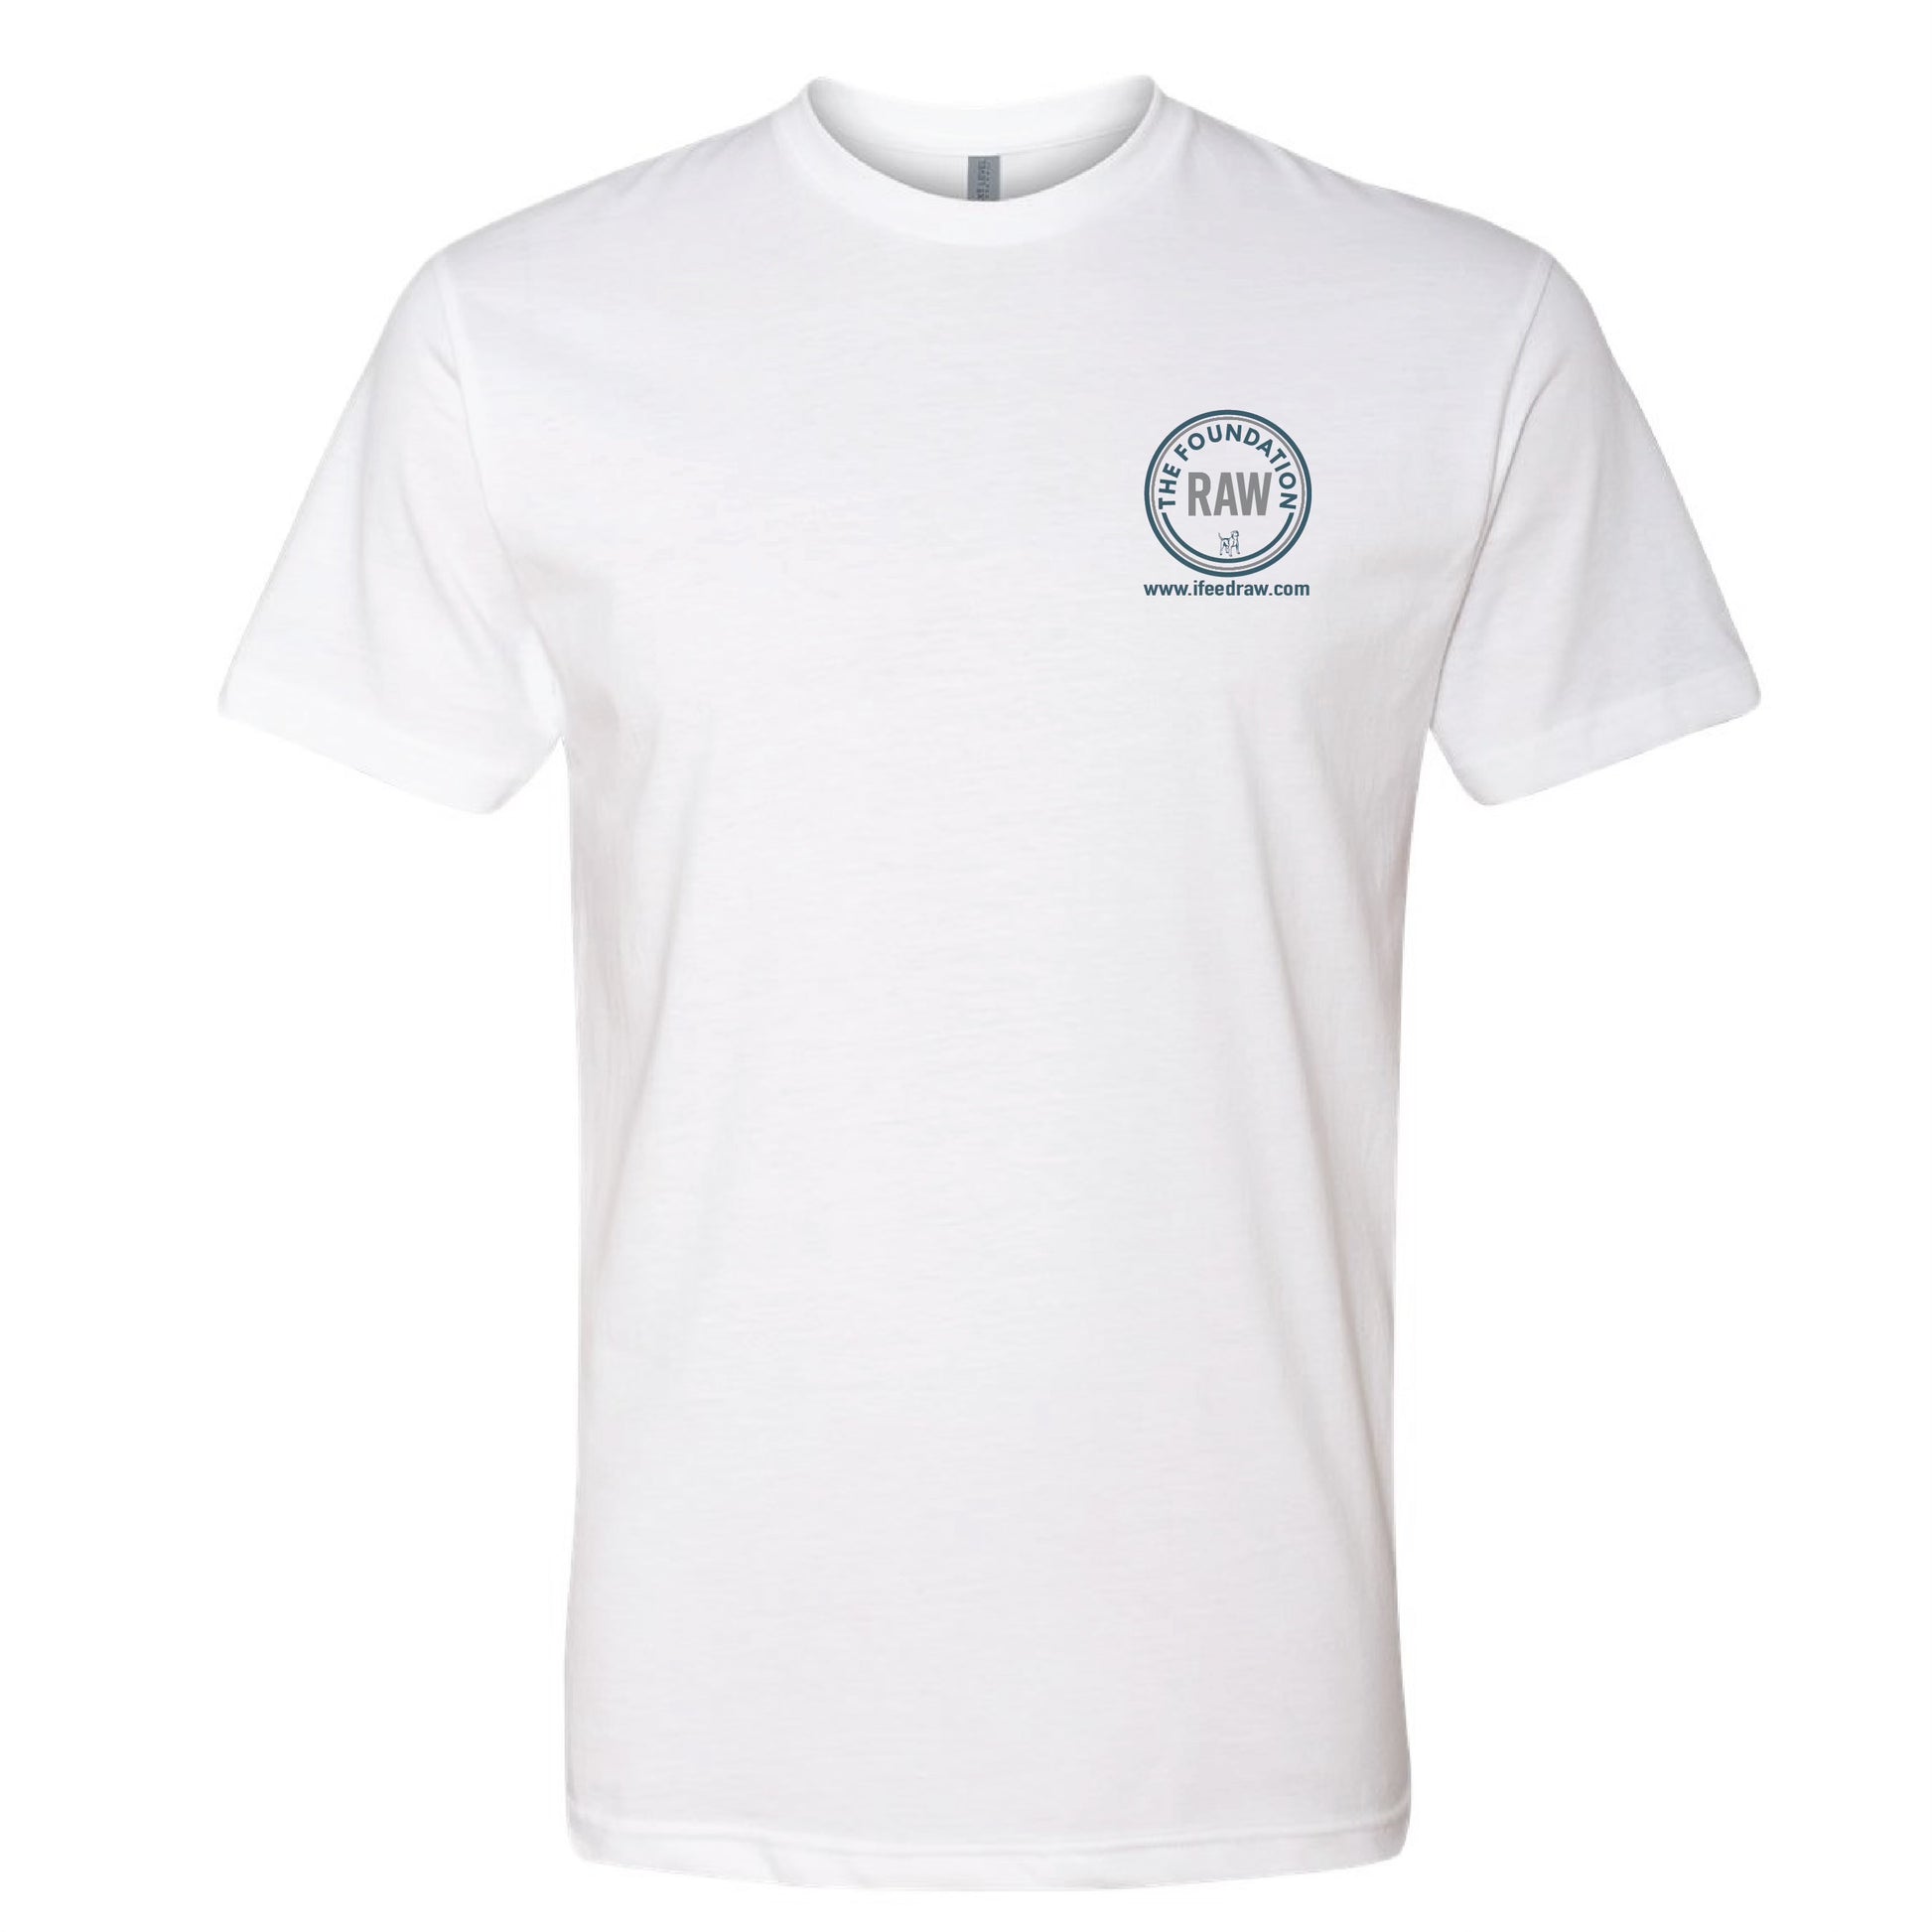 white t-shirt with blue text logo 